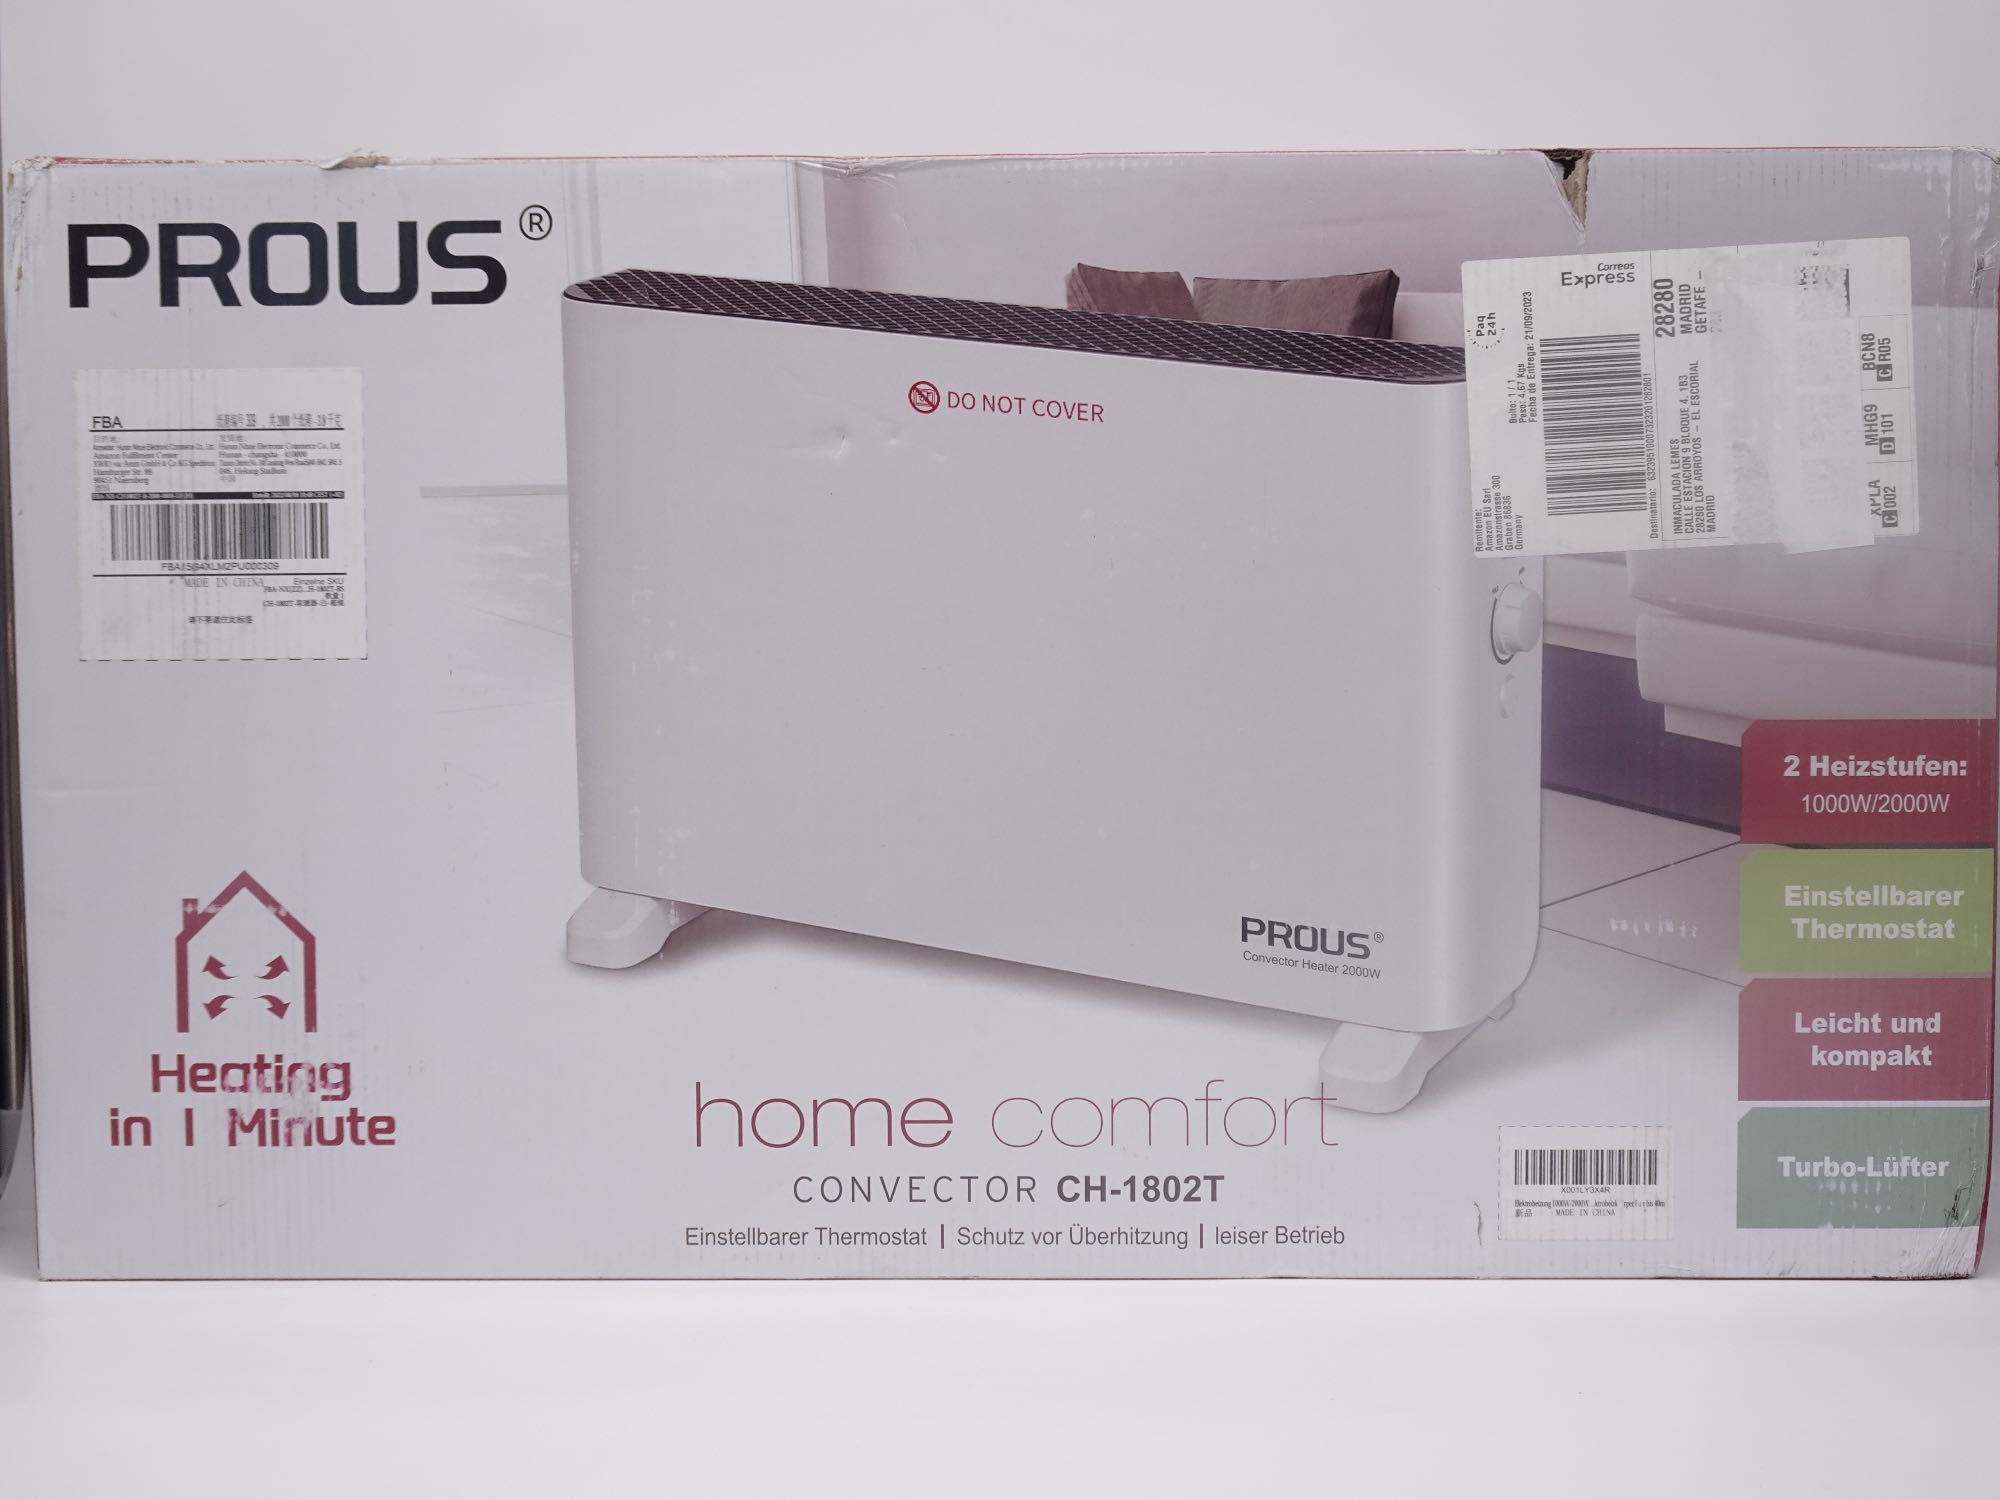 PROUS 2000W Electric Convector Heater